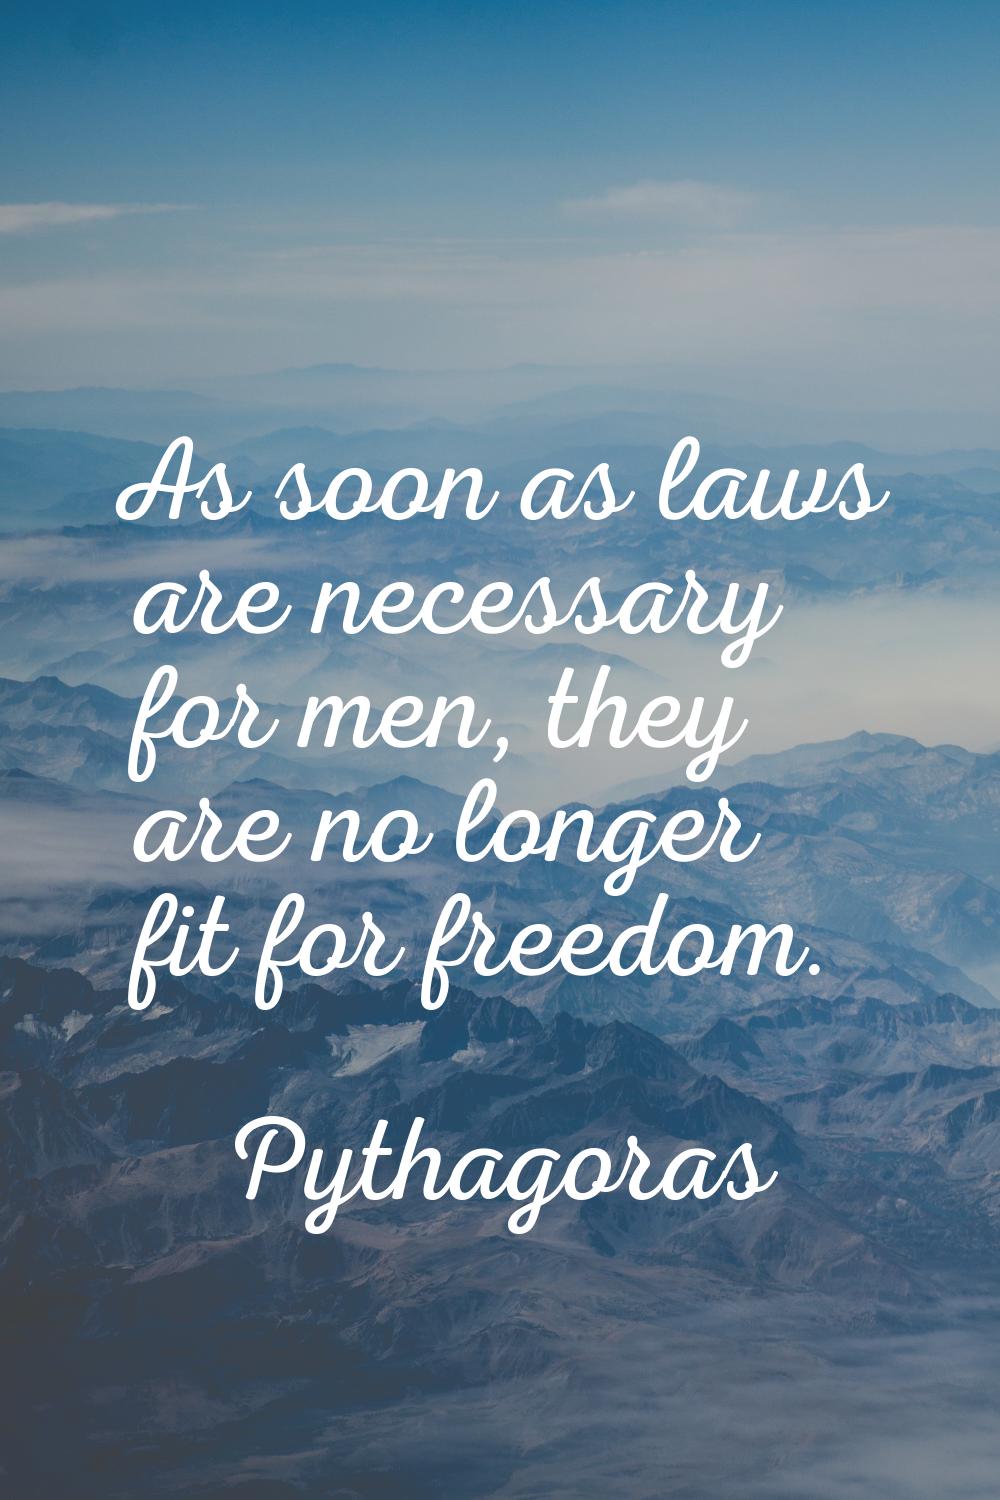 As soon as laws are necessary for men, they are no longer fit for freedom.